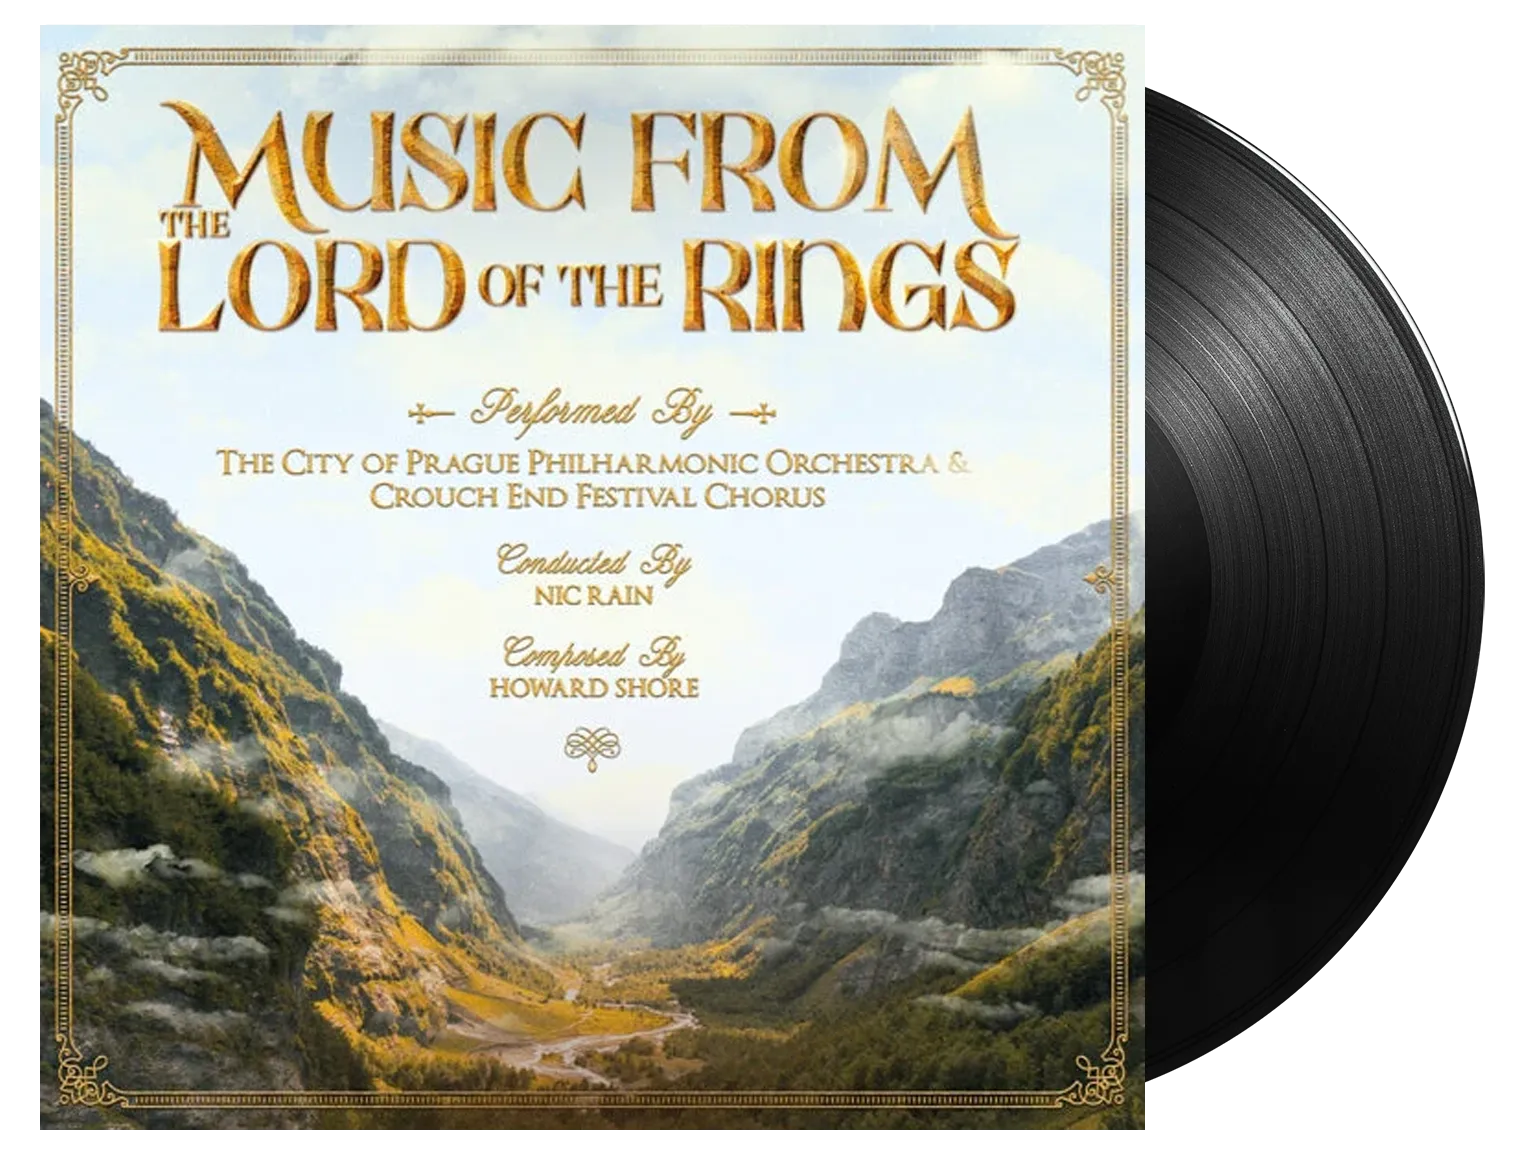 The Music of The Lord of the Rings Films by Doug Adams hardcover Howard  Shore | eBay